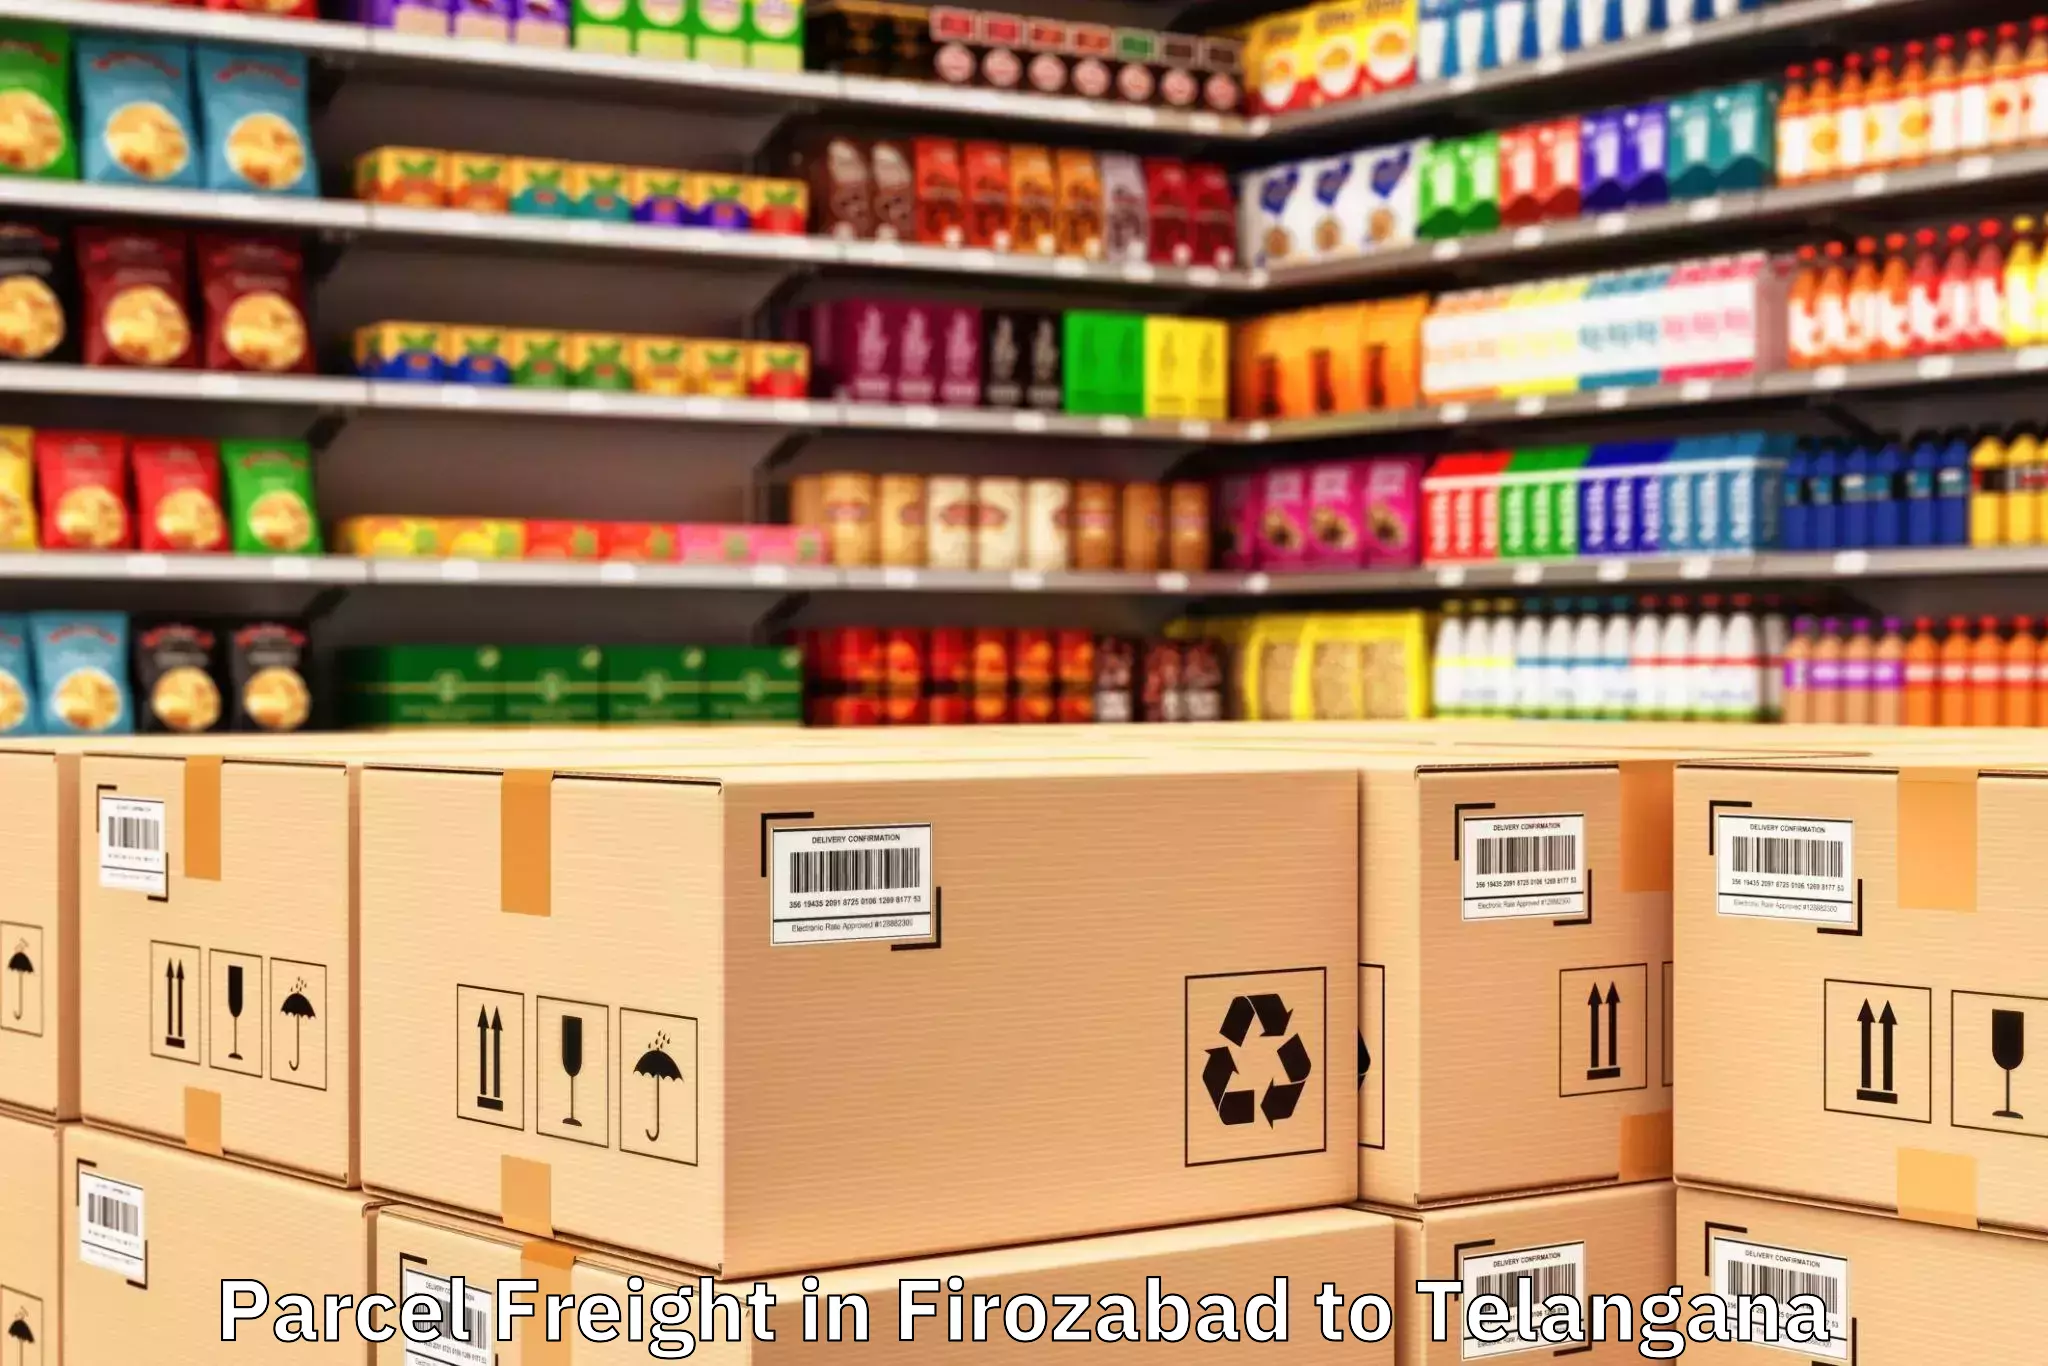 Reliable Firozabad to Kohir Parcel Freight